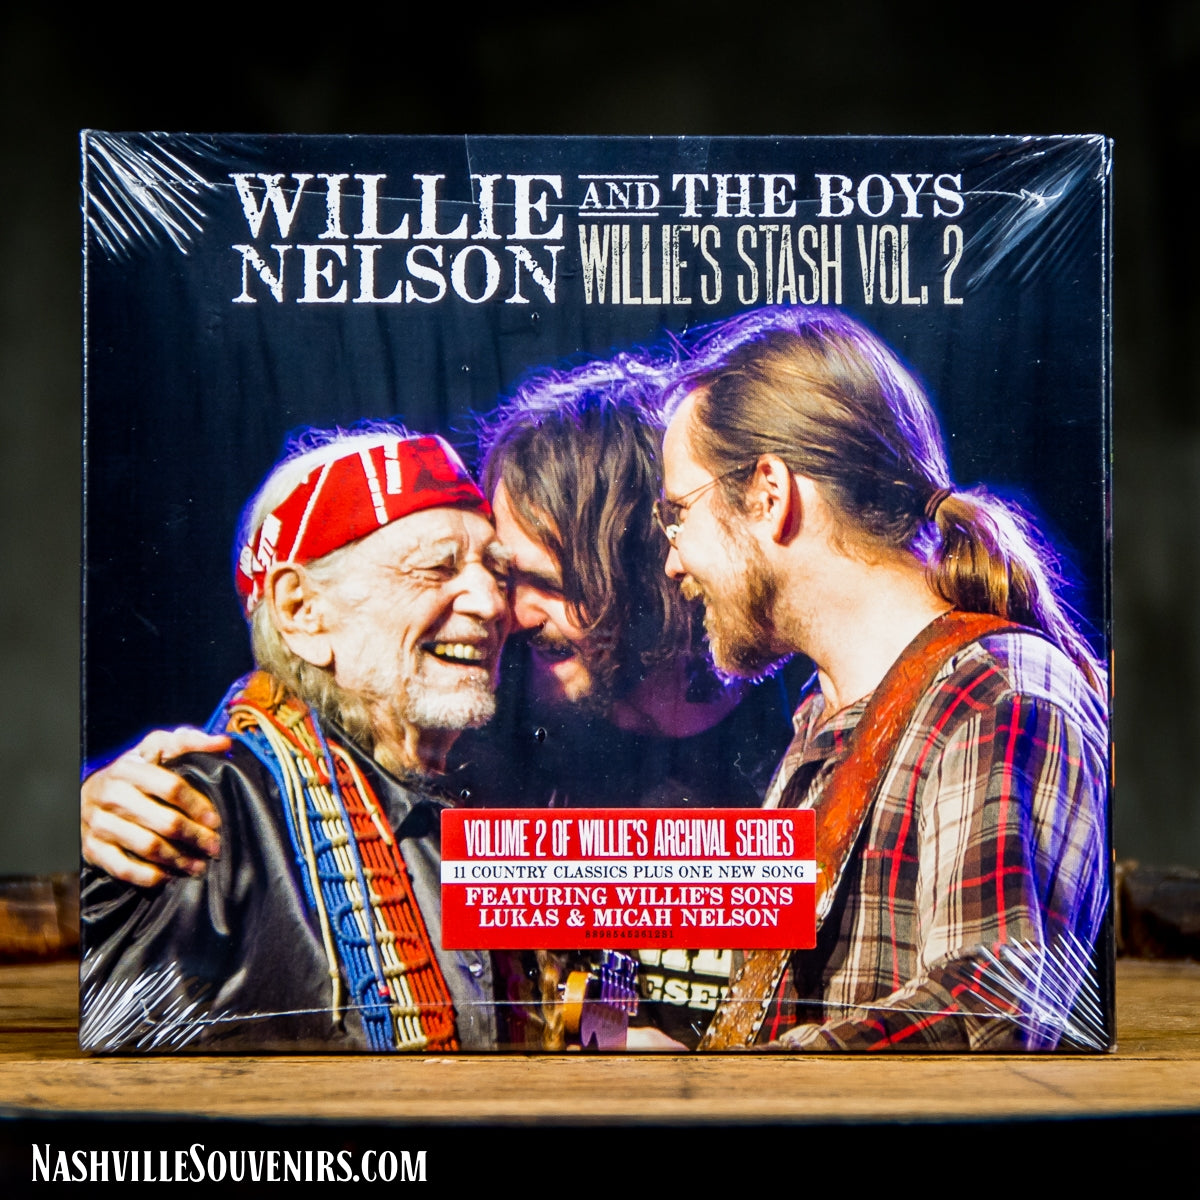 Willie Nelson and The Boys CD